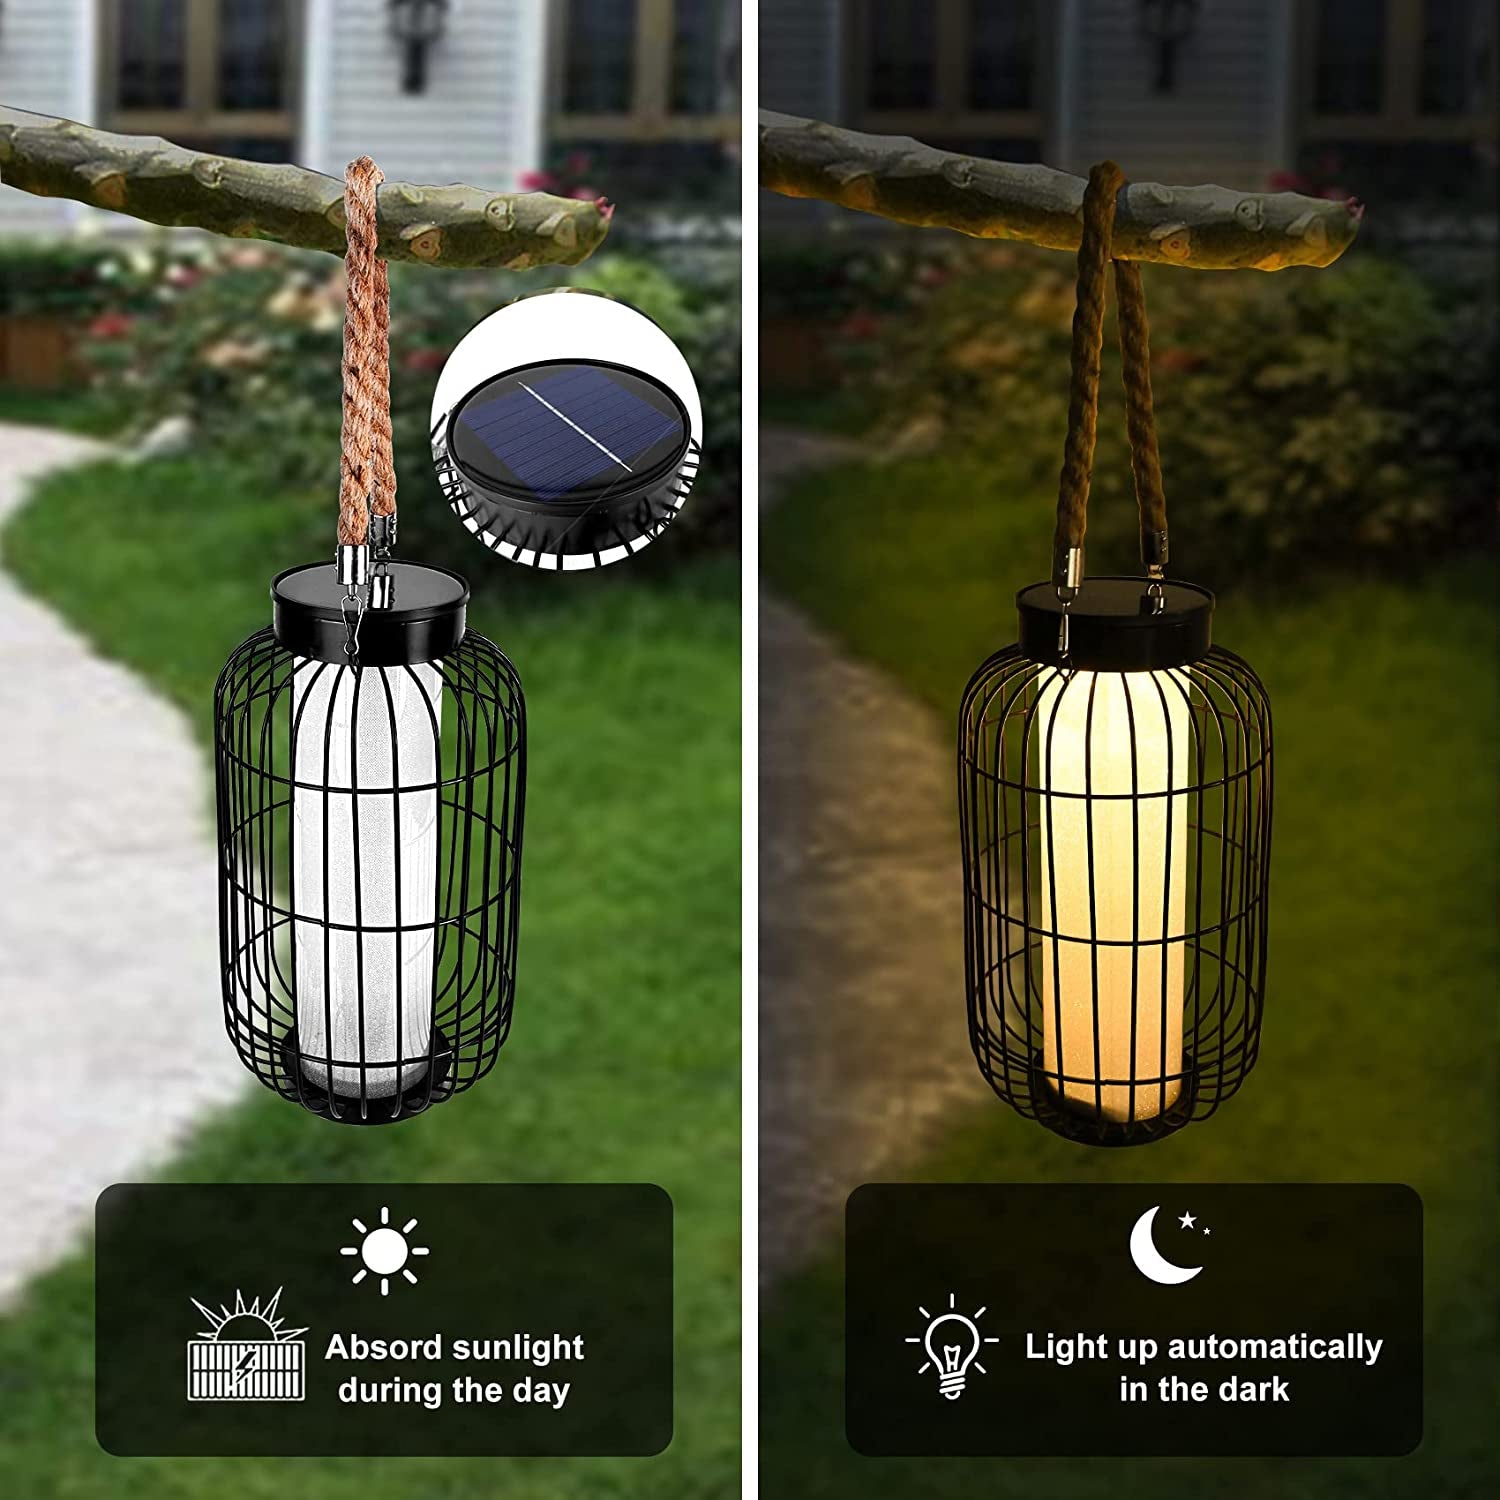 baterysu, Large Outdoor Solar Lanterns Hanging Light Waterproof LED Garden Lights Solar Powered Retro Metal Auto on off Table Lamp for Garden Patio Porch Lawn Pathway Walkway Tabletop Decorative(Black)